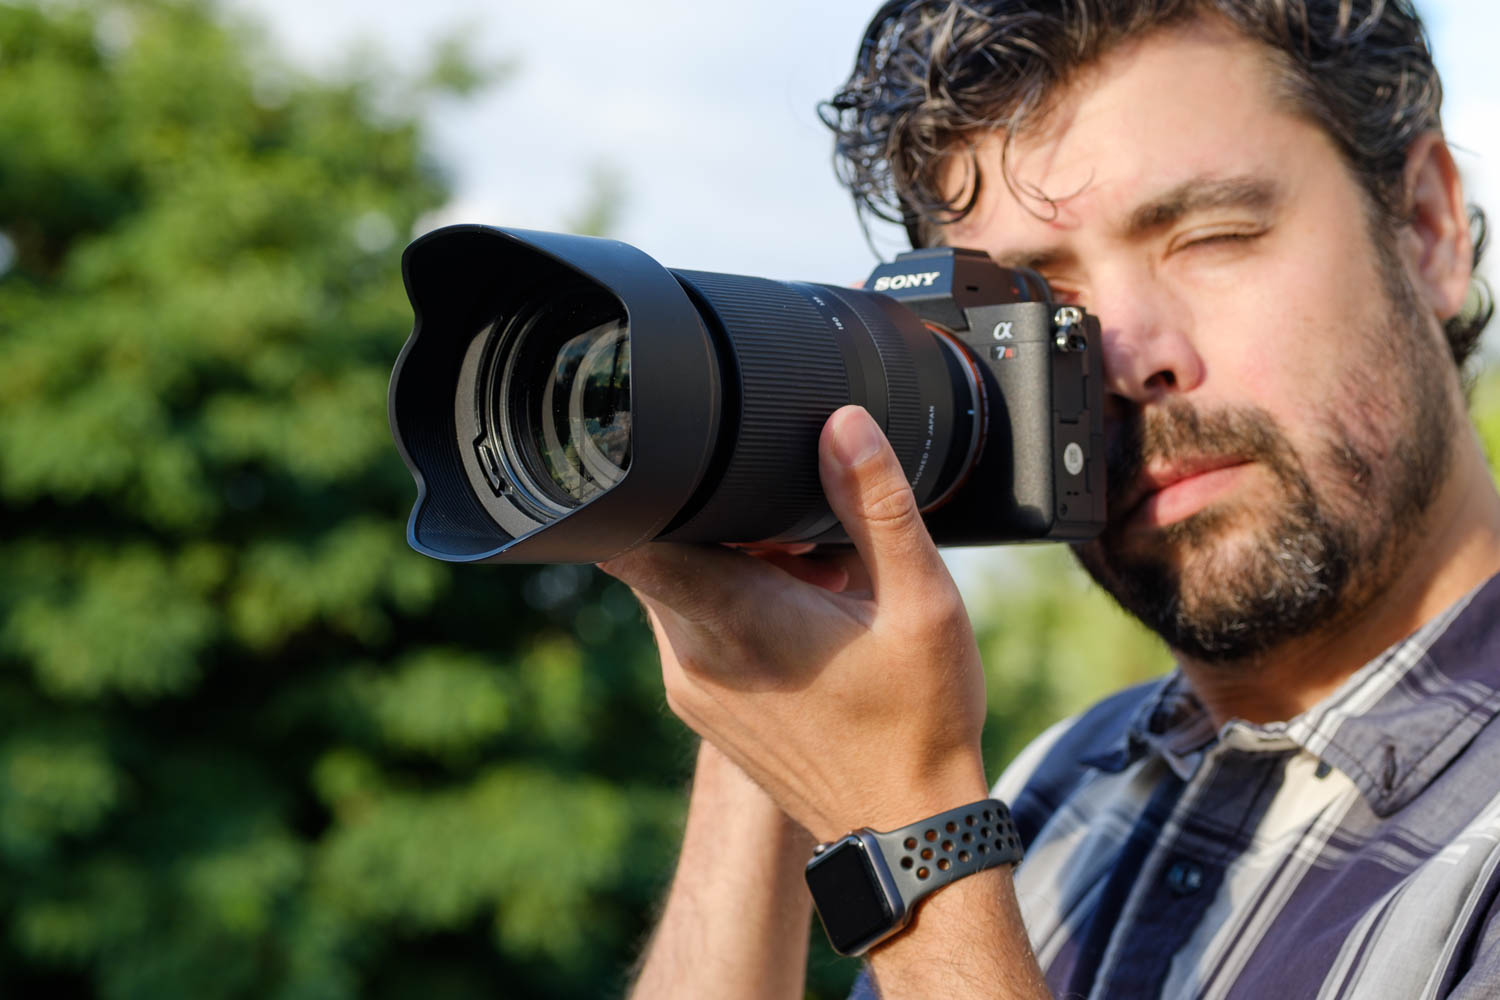 Tamron 70-180mm f/2.8 Review: A Top-Notch Telephoto for Sony